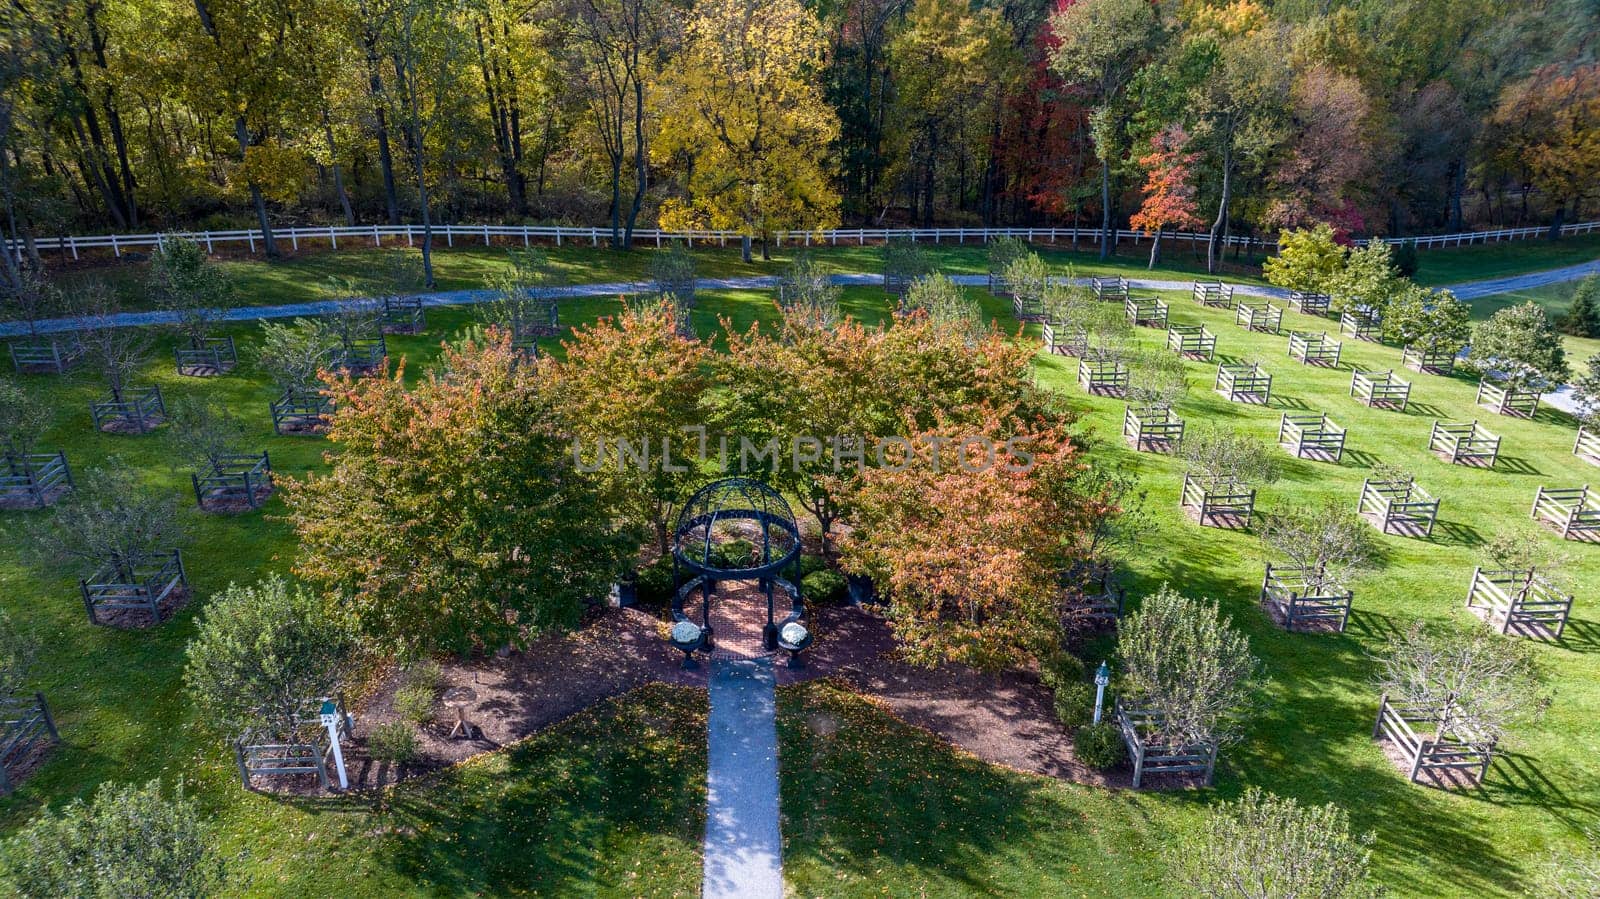 Elizabethtown, Pennsylvania, October 22, 2023 - An Aerial View of a Iron Gazebo in the Center of an Orchard on an Autumn Day